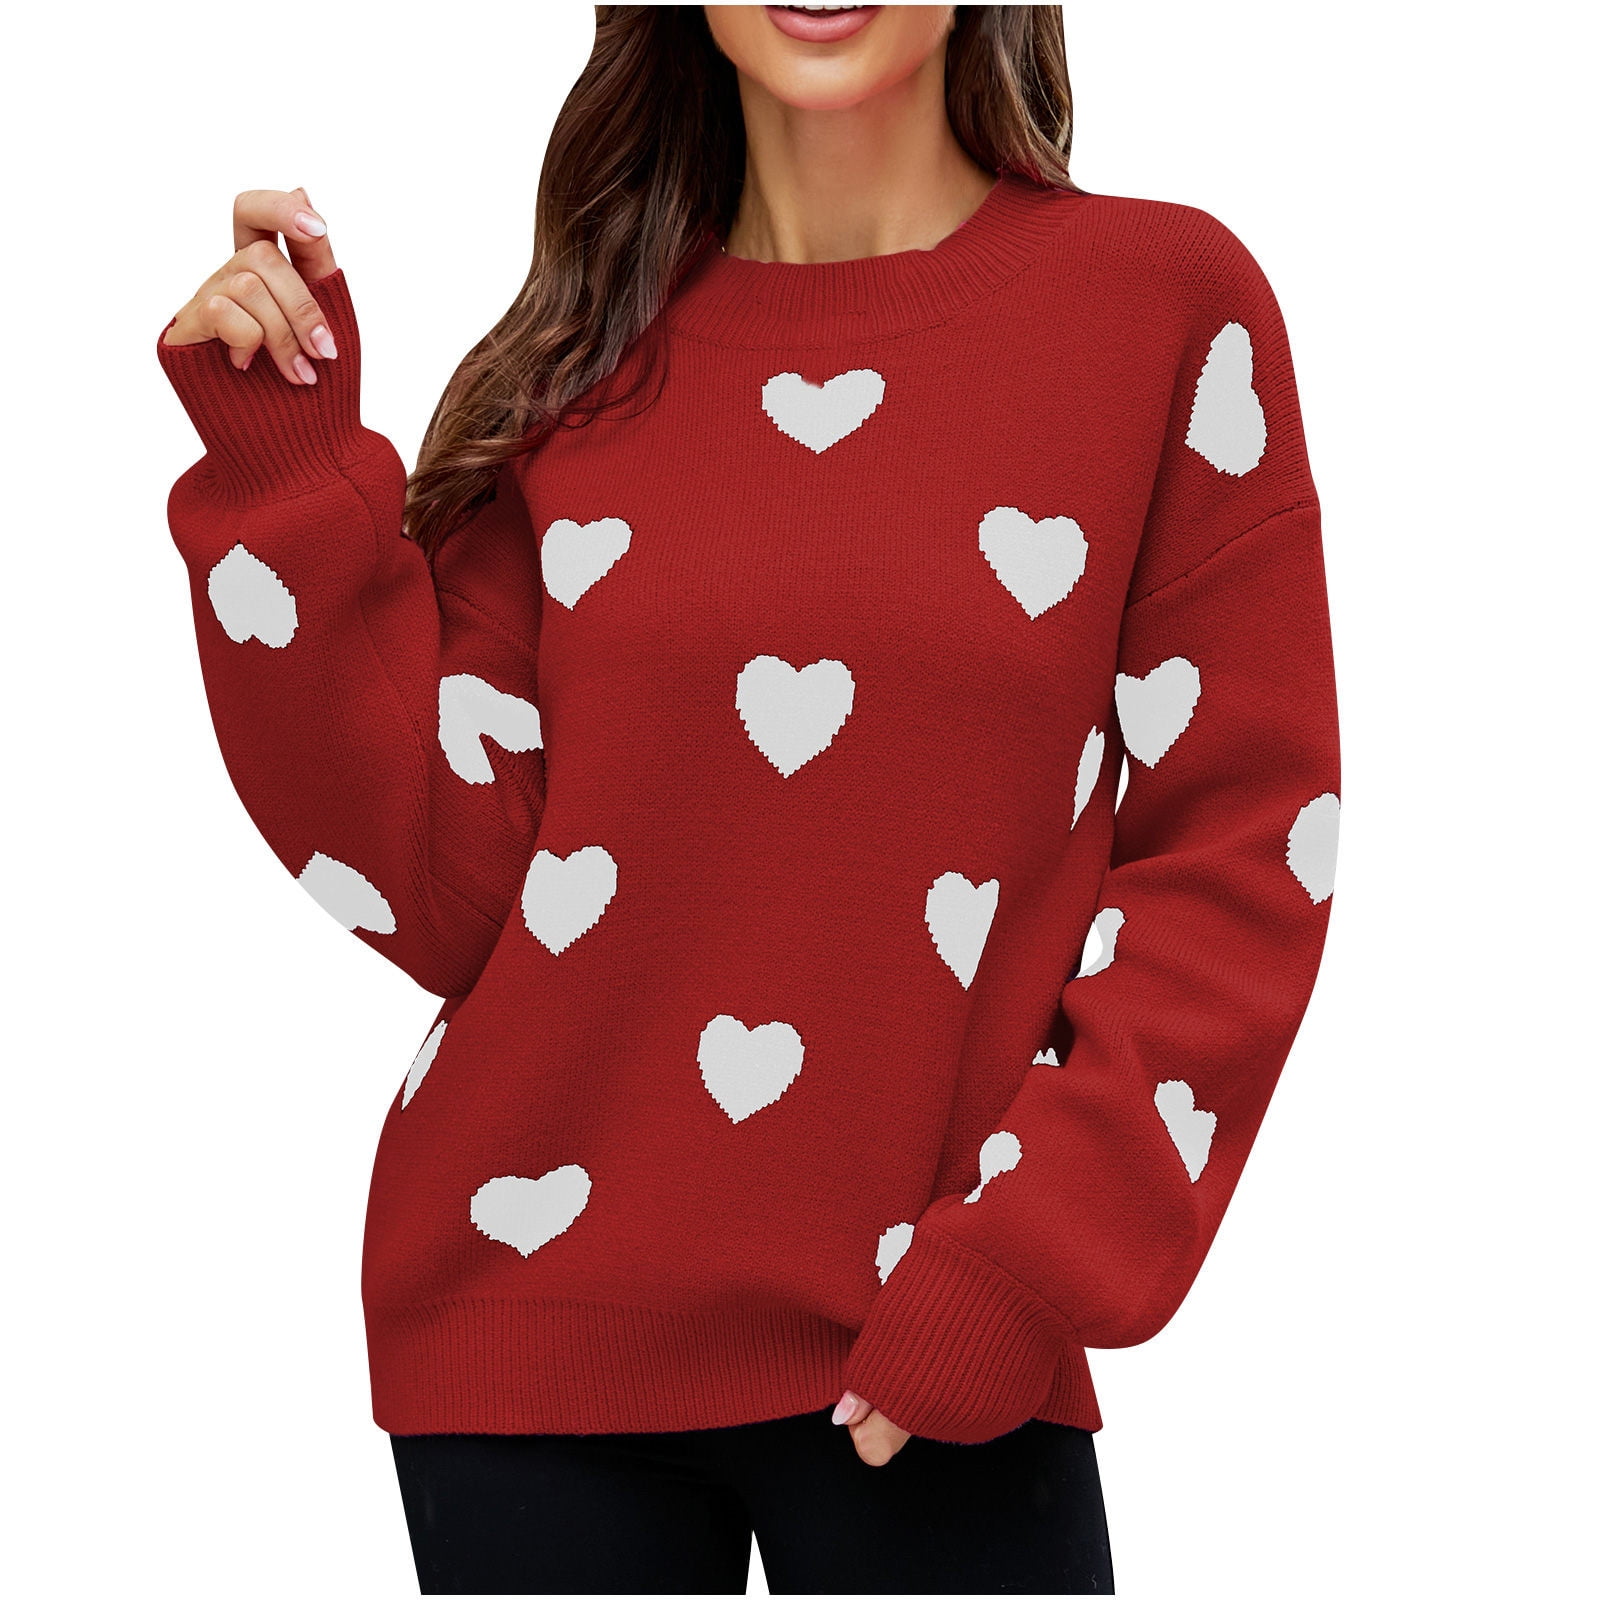 JGGSPWM Cute Heart Print Sweaters for Womens Valentines Day Tops